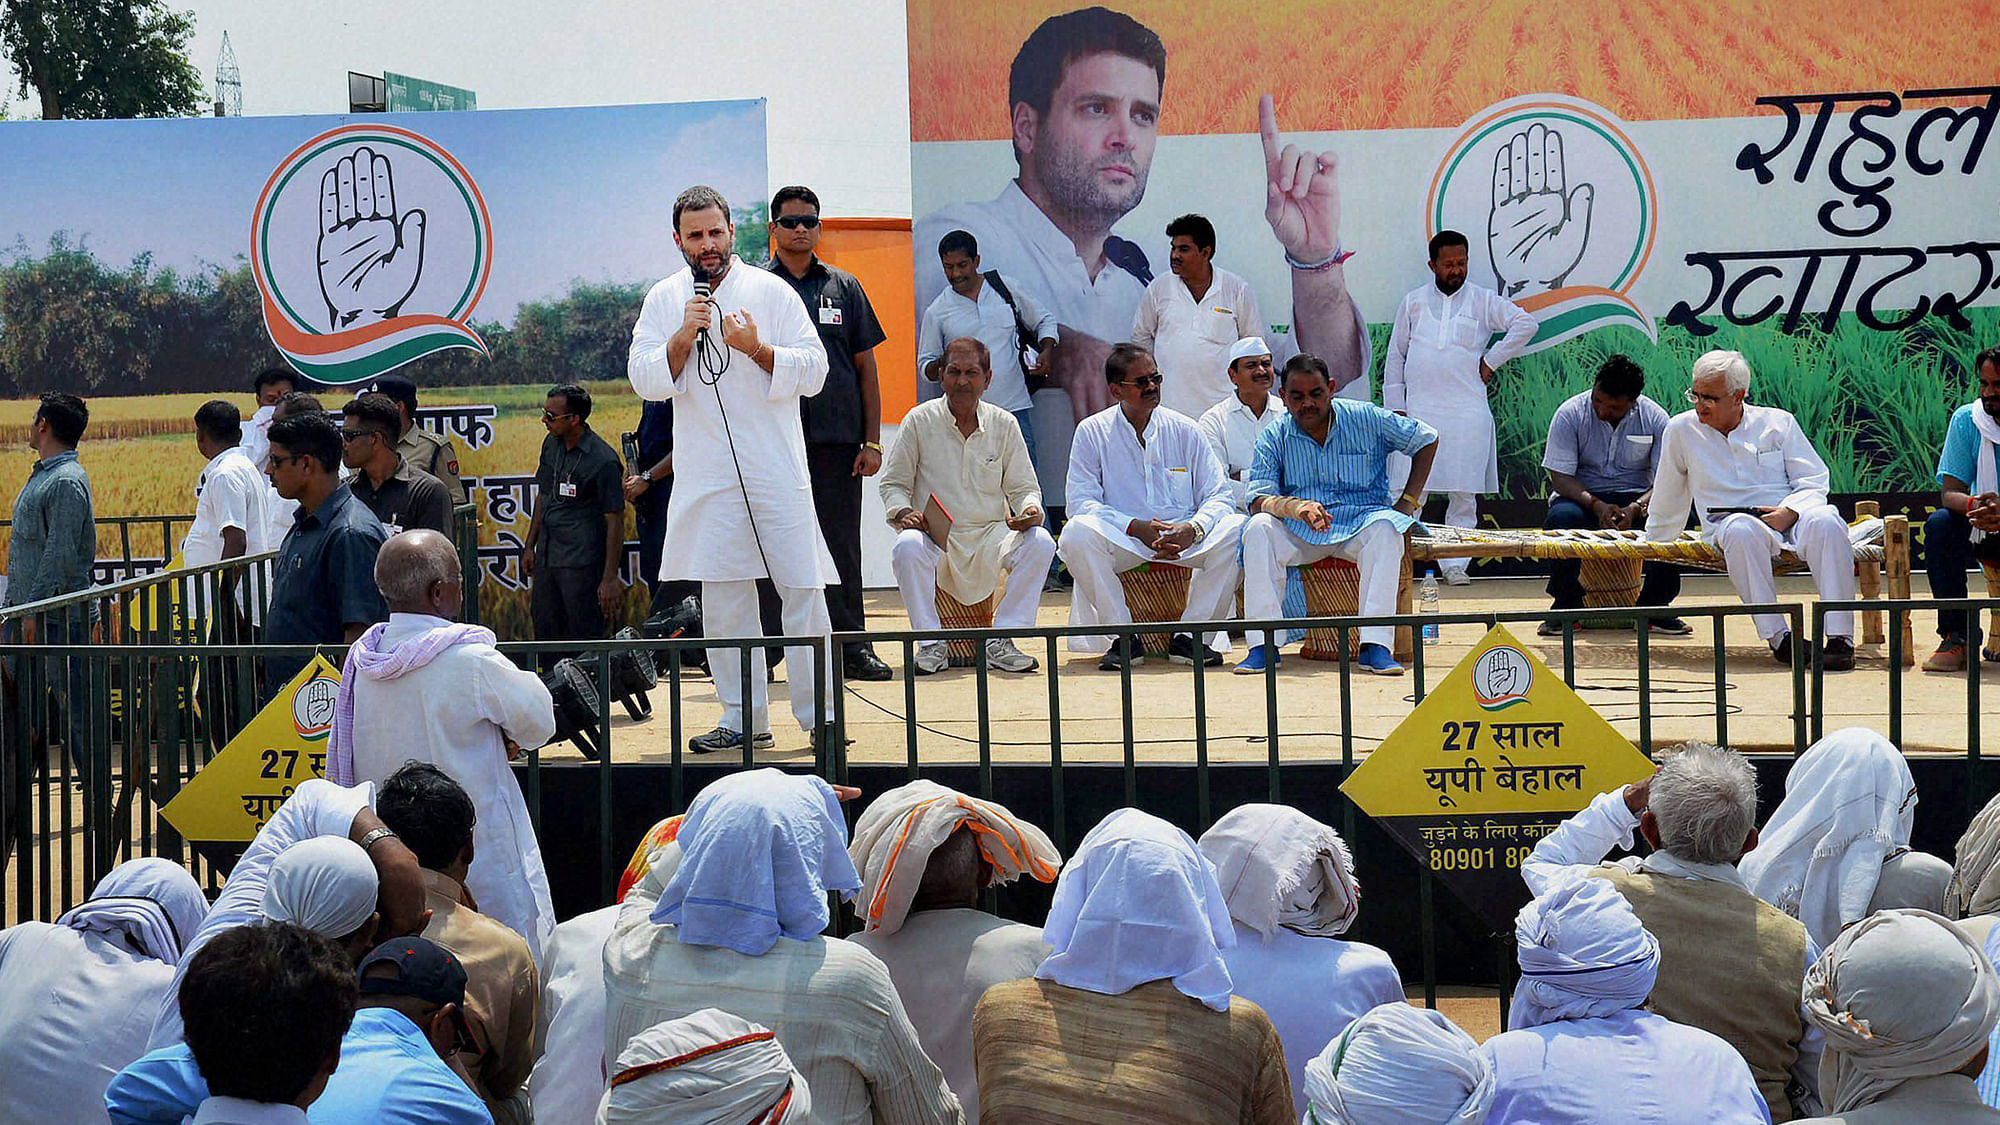 Congress Vice President Rahul Gandhi interacts with farmers at ‘Khat Pe Charcha’ programme during his Kisan Yatra in Mirzapur on Wednesday. (Photo: PTI)